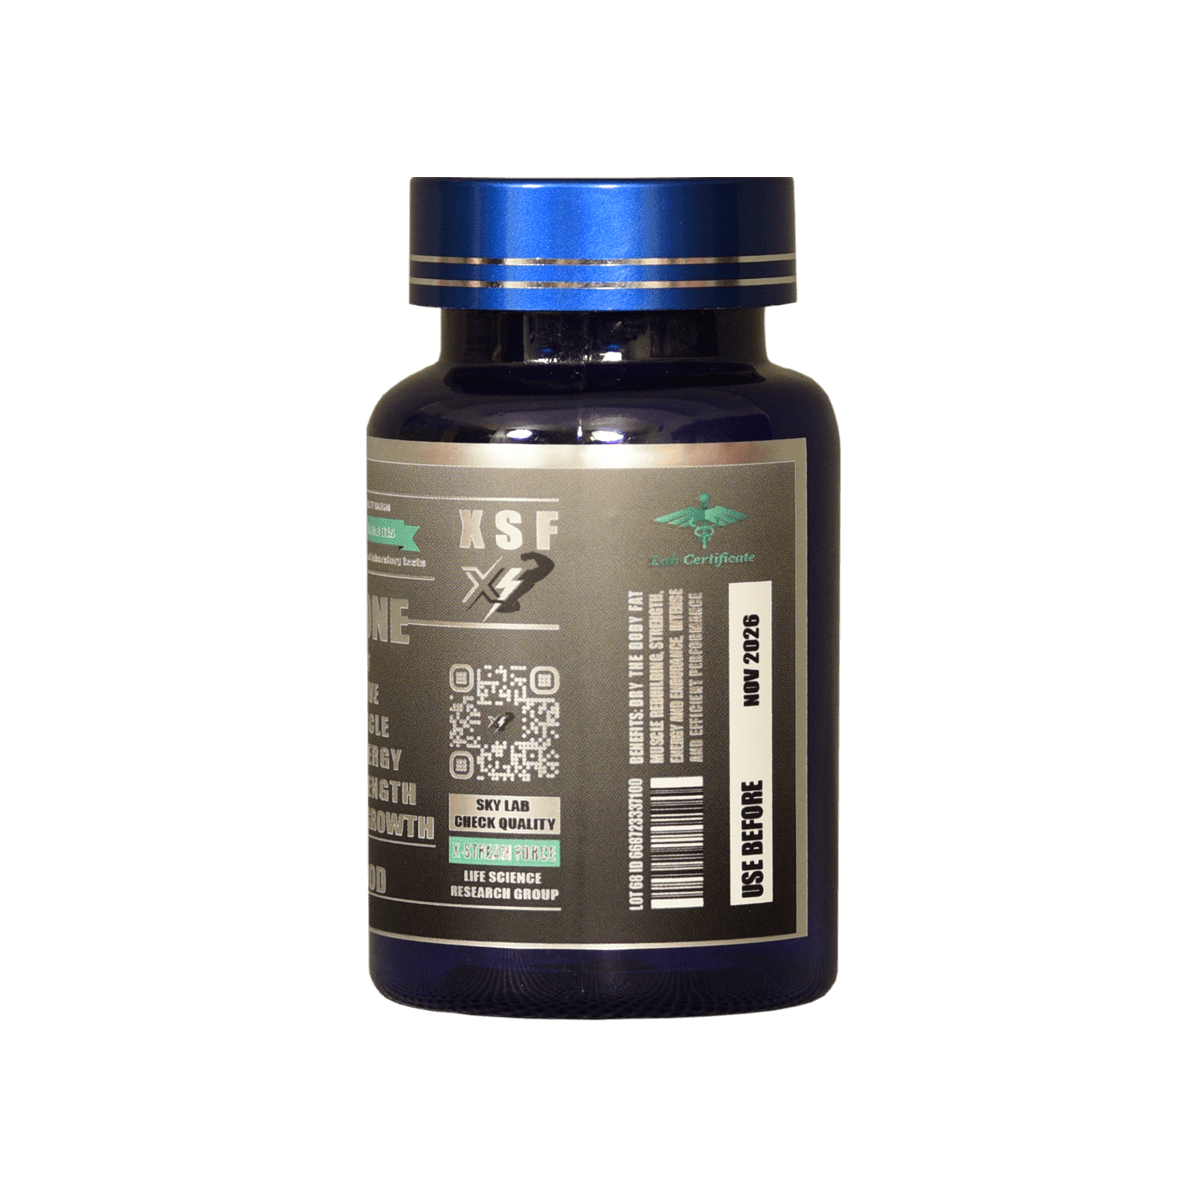 testolone-rad140-capsules-90-10mg-muscle shop-xstreamforce-for recomp-strength-fat cleaner-mass-stream x power✦rad140 sarms✦ fitness supplements | XSF Store